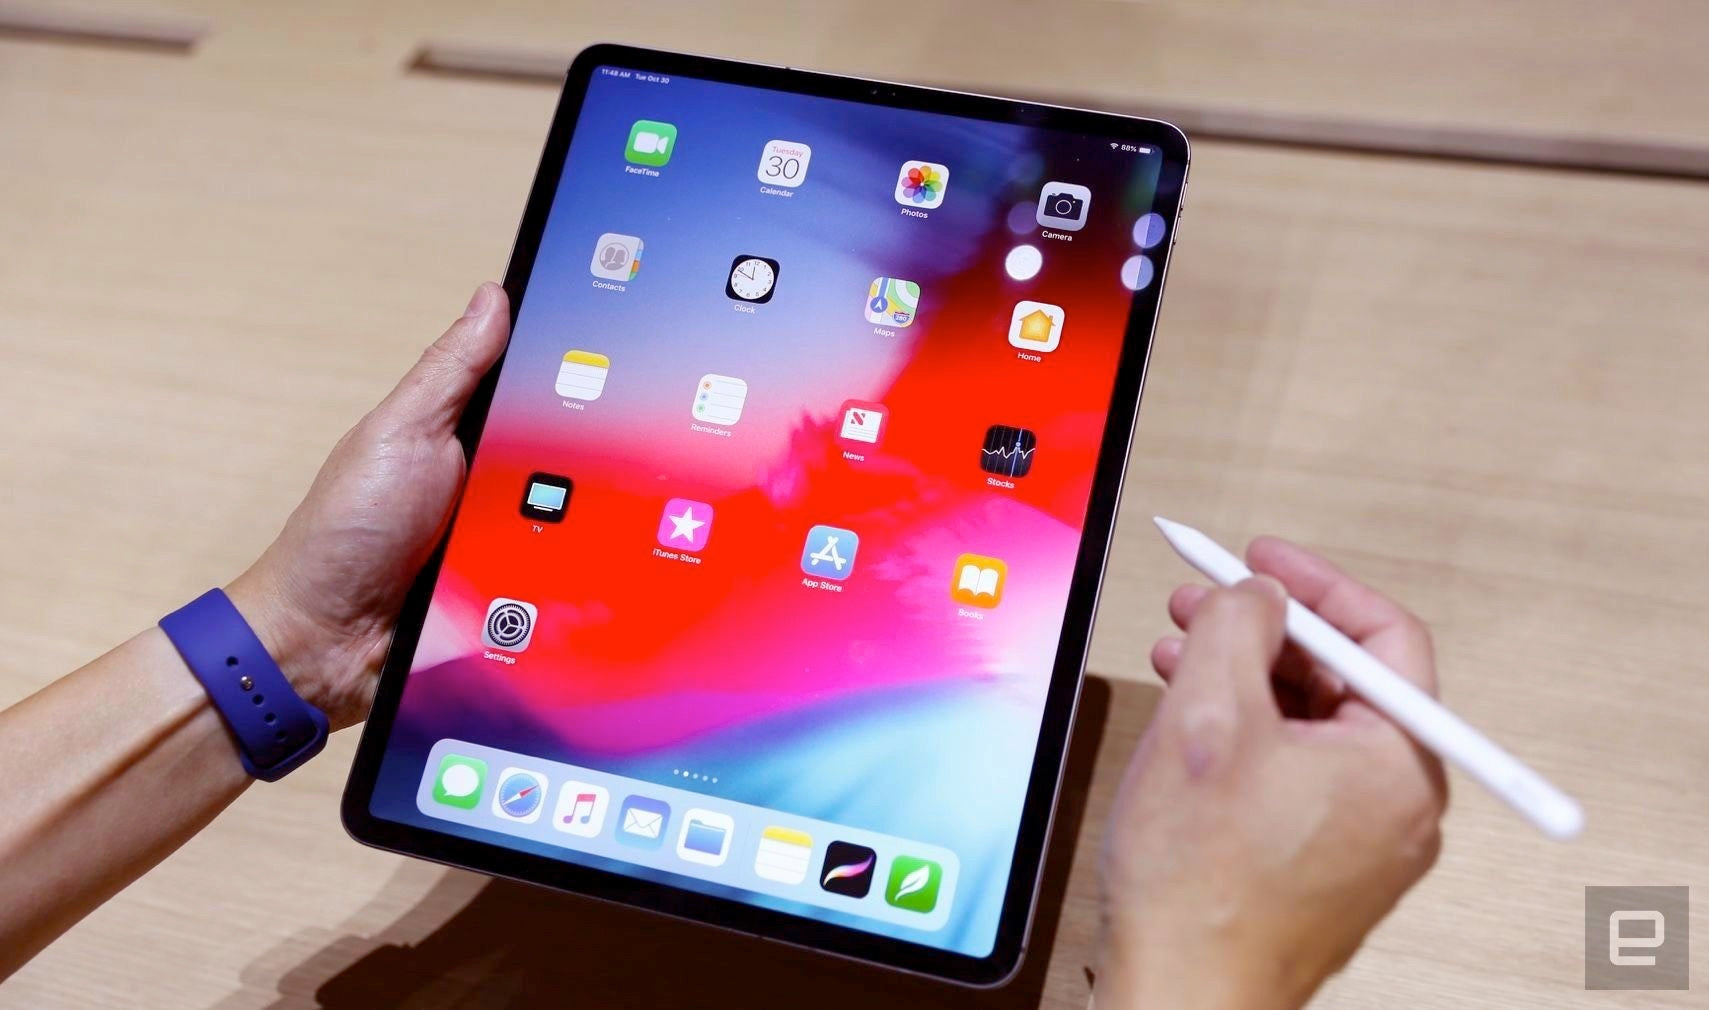 Where to Buy used iPad in Sydney